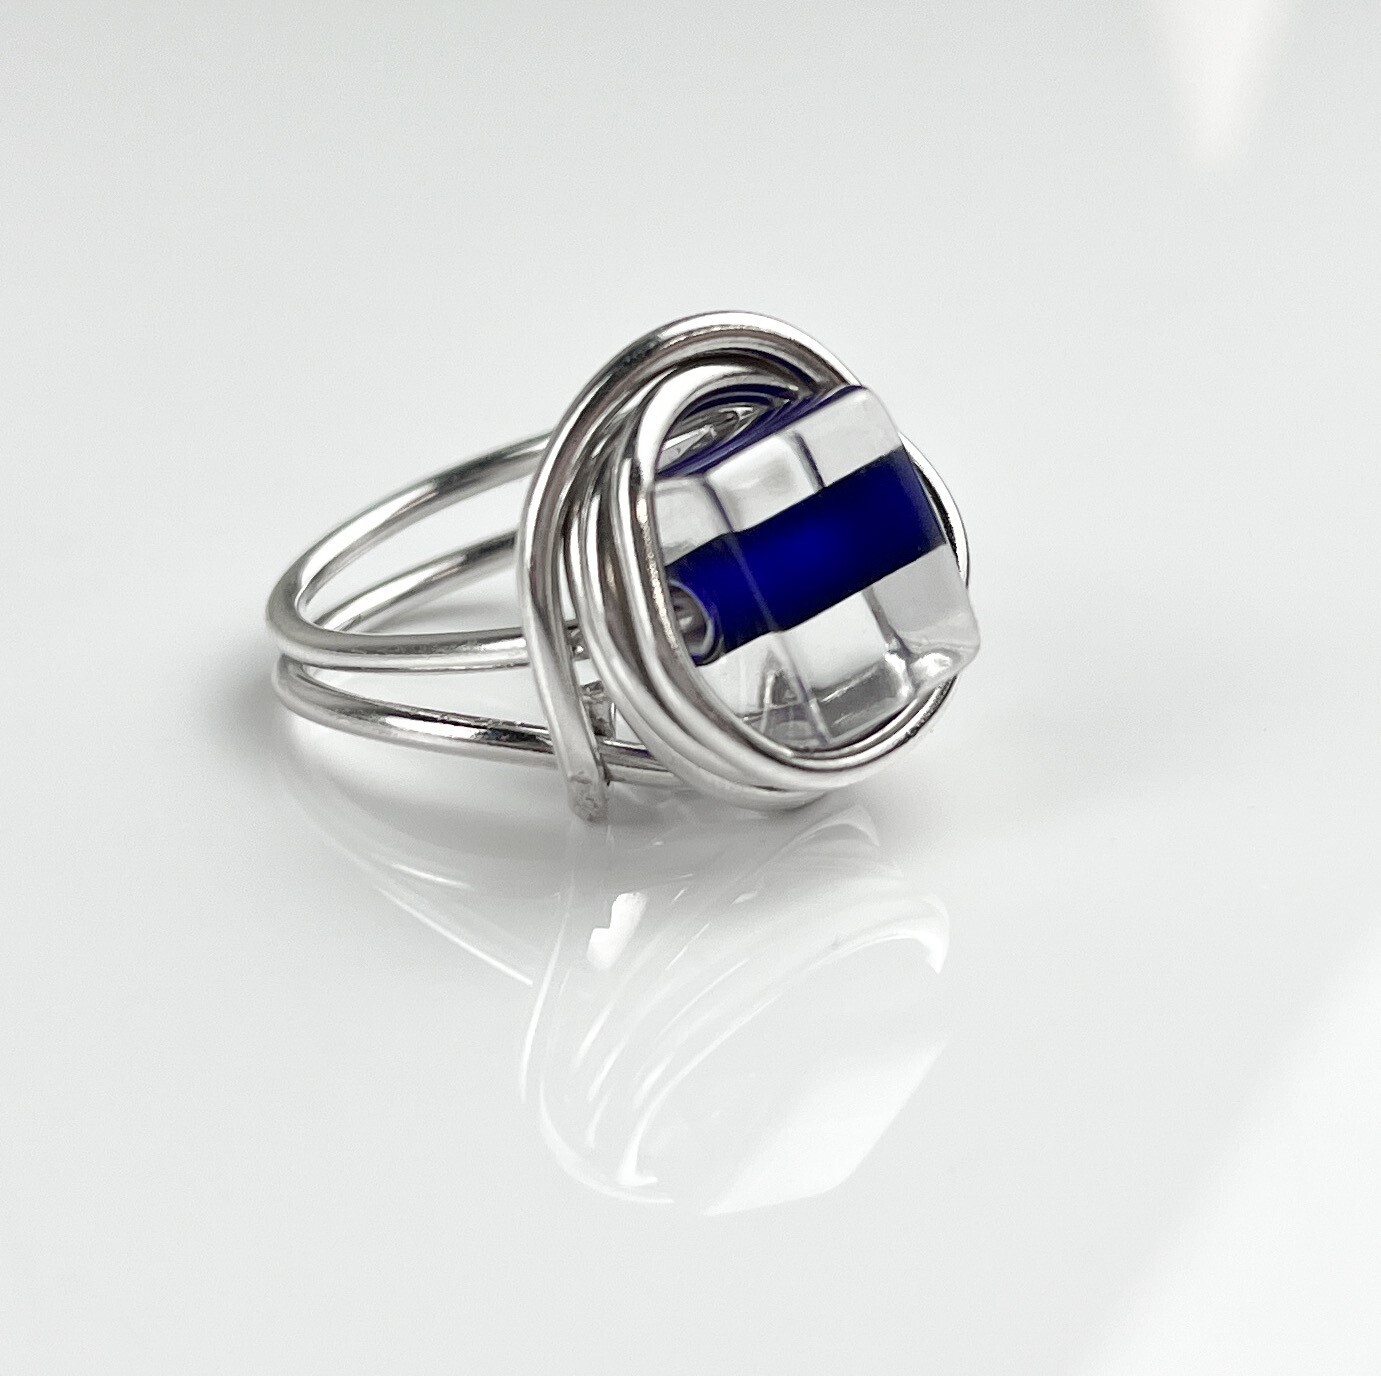 Entwined Glass Bead Ring Sterling Silver 6.5, Color: Blue